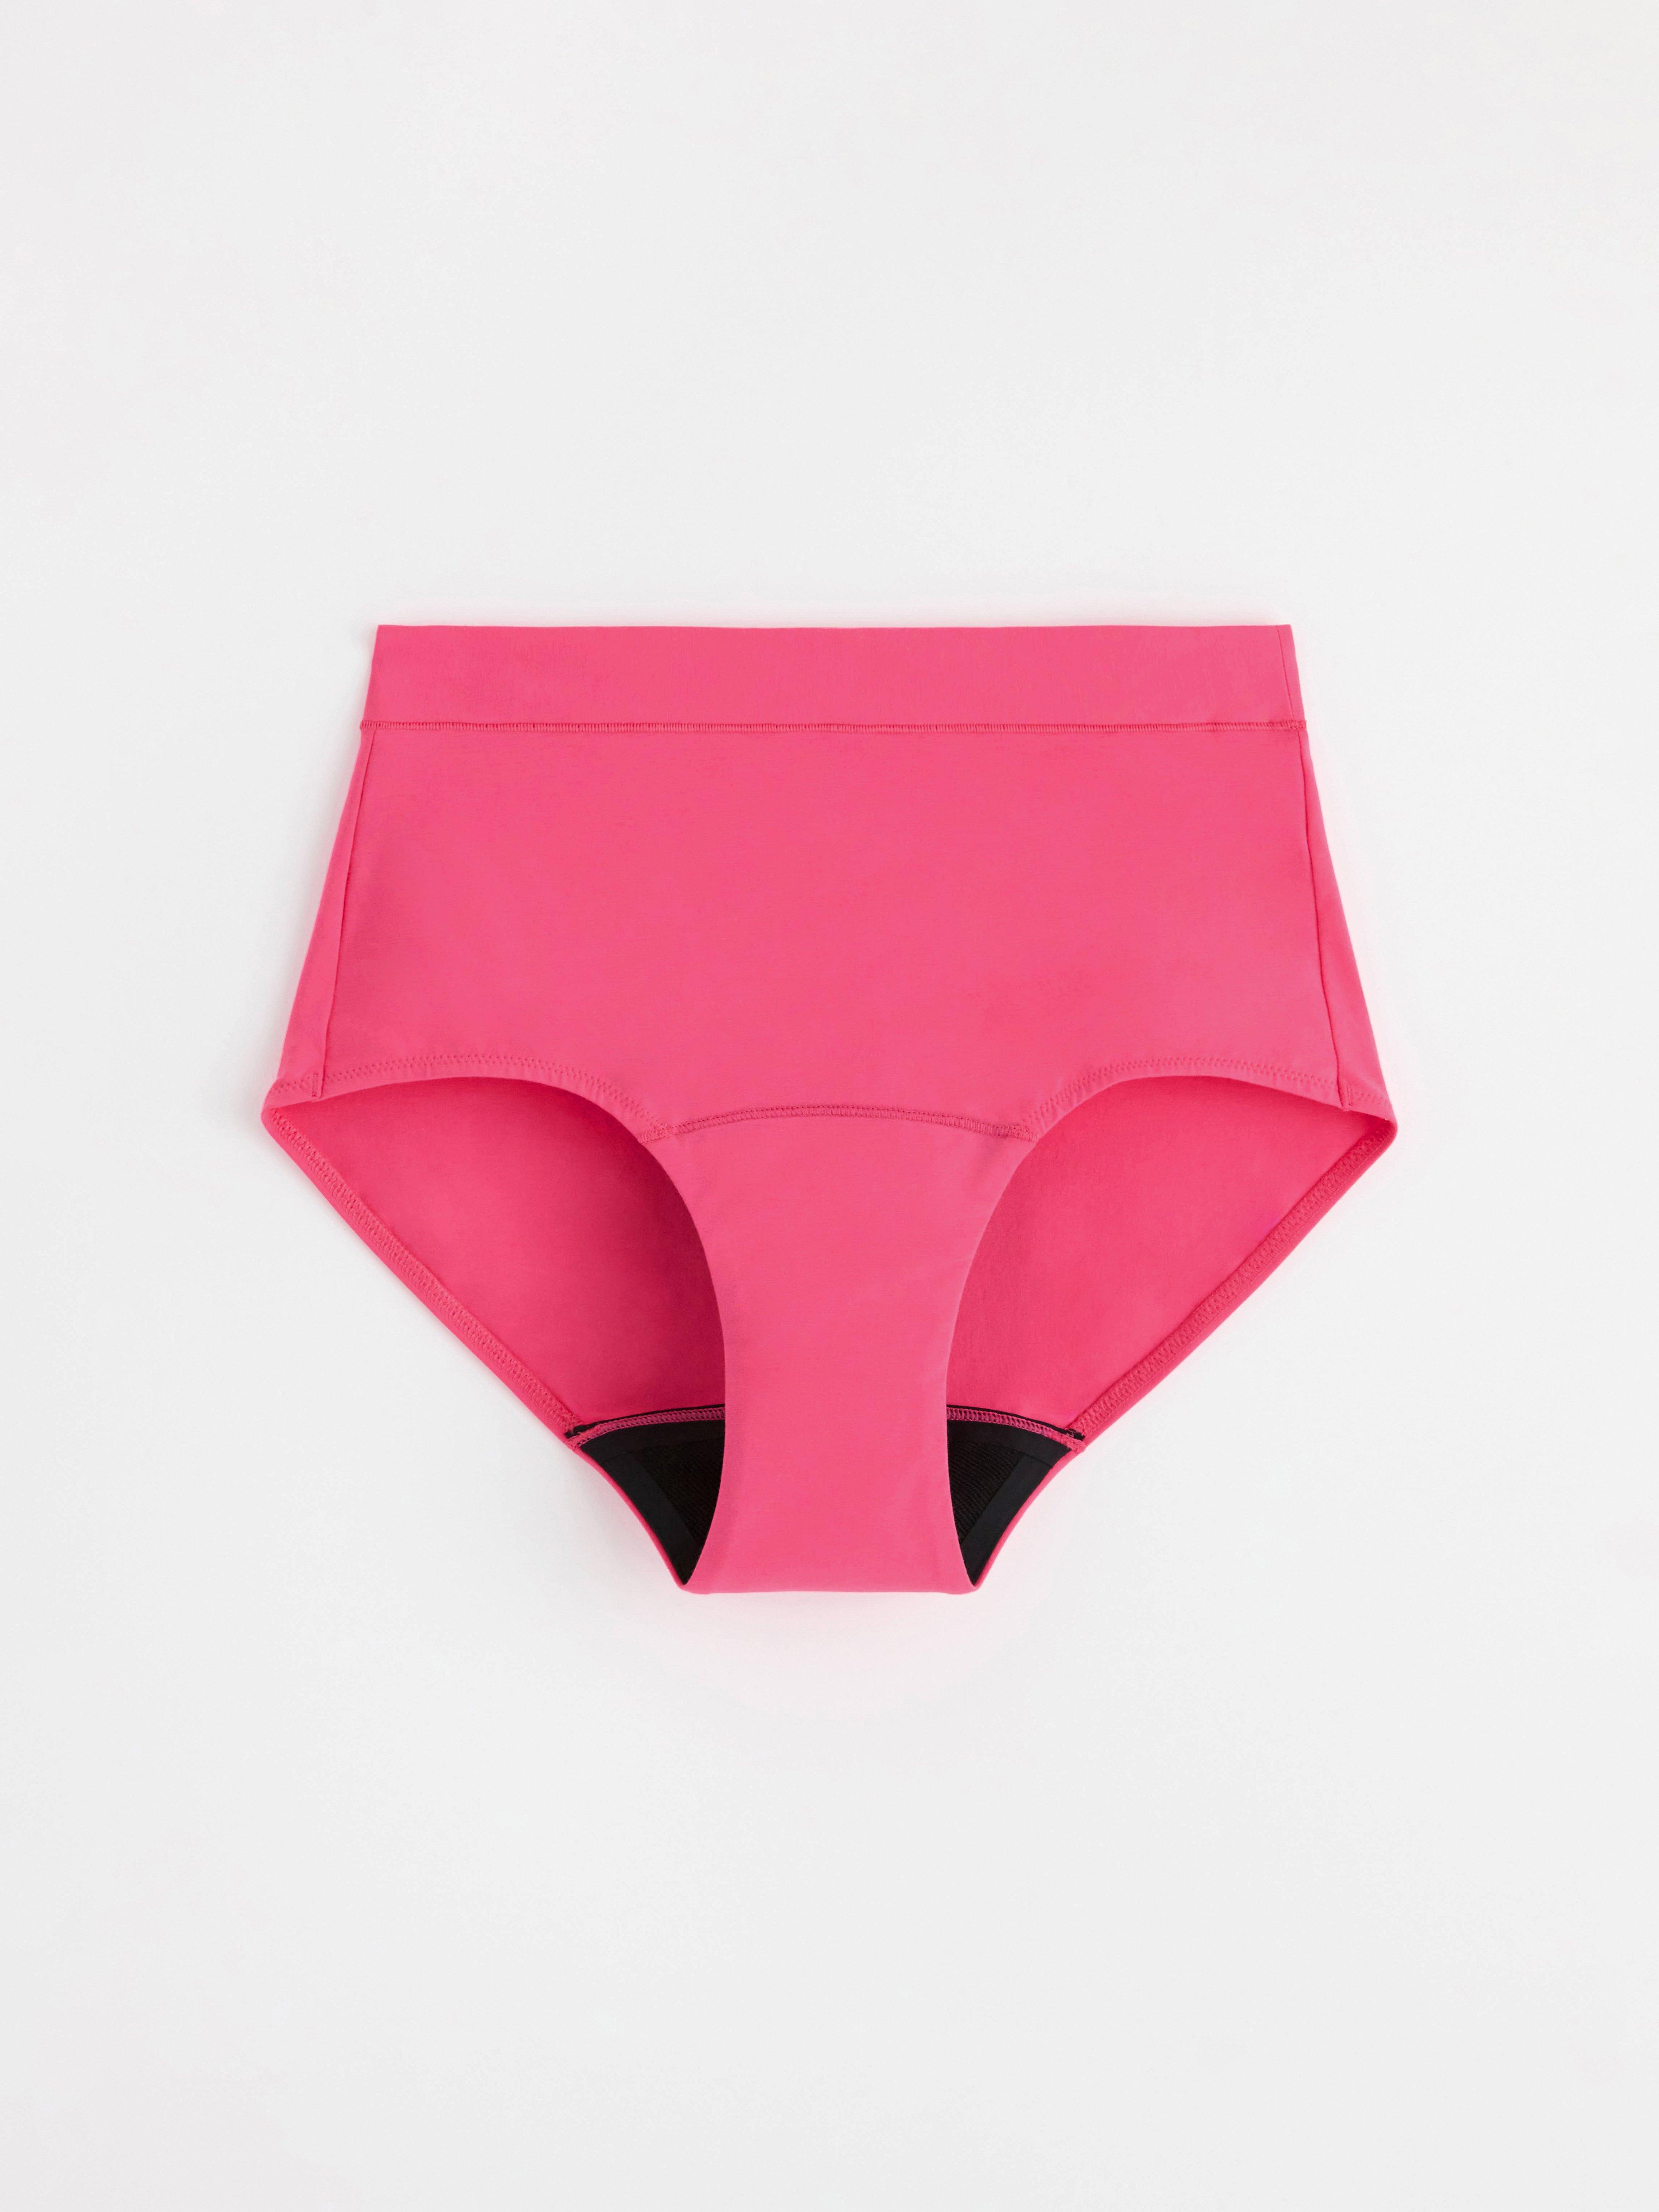 Period Panty with extended gusset - Boxer Super - Female Engineering